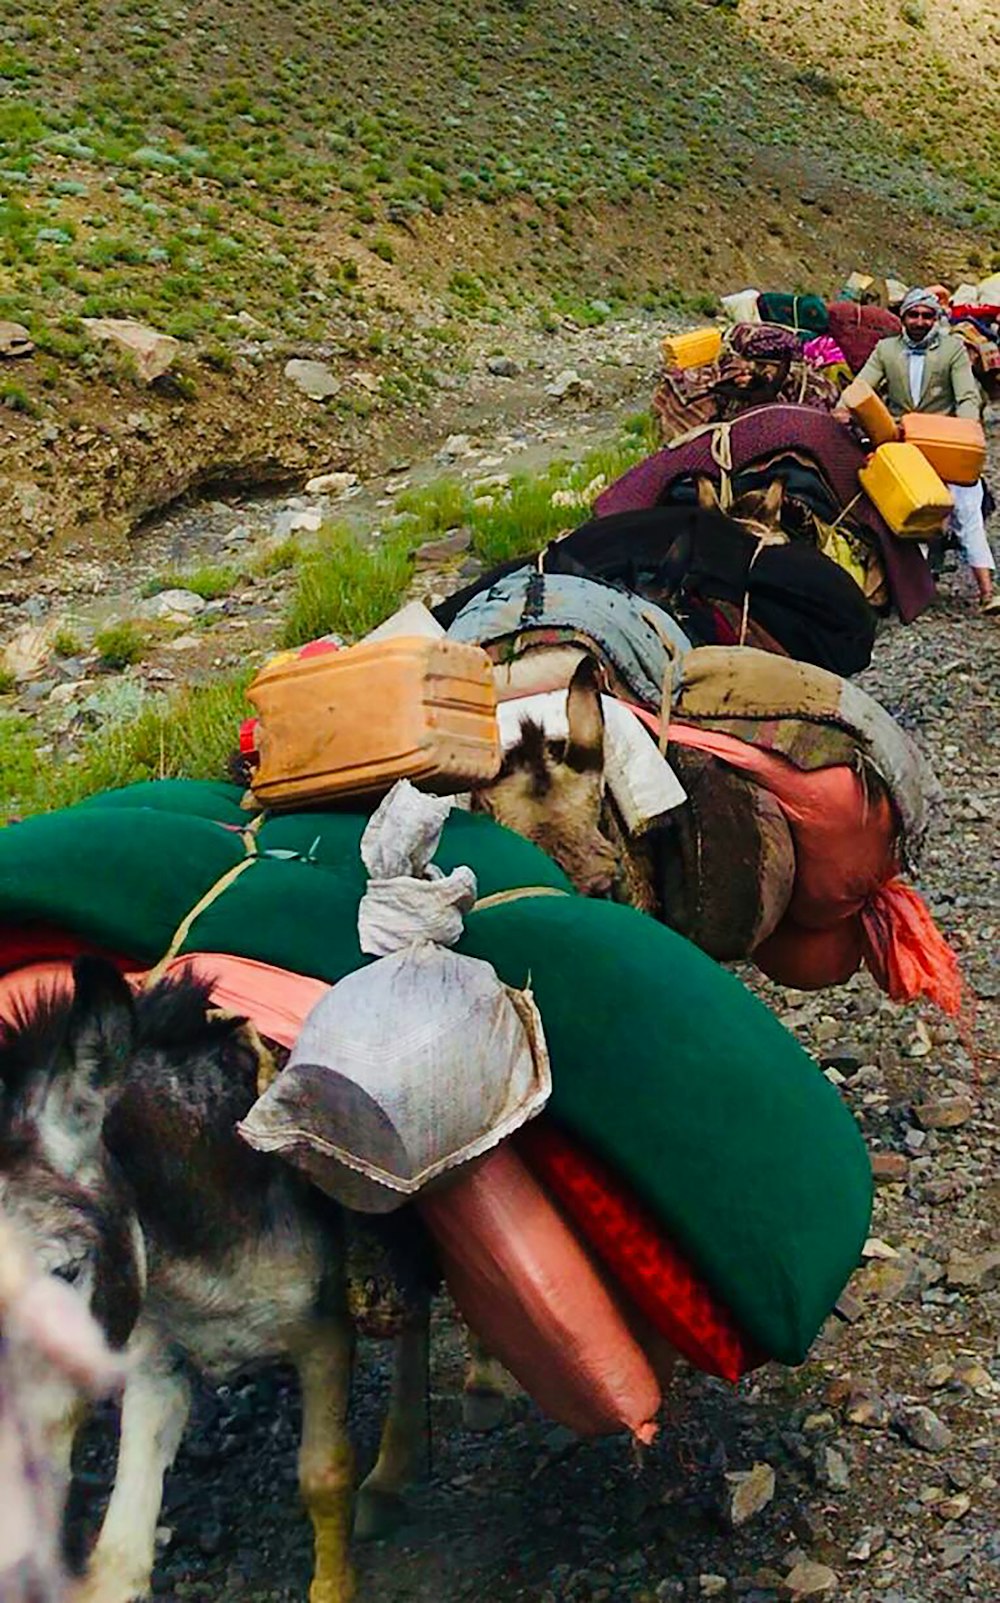 a donkey carrying bags